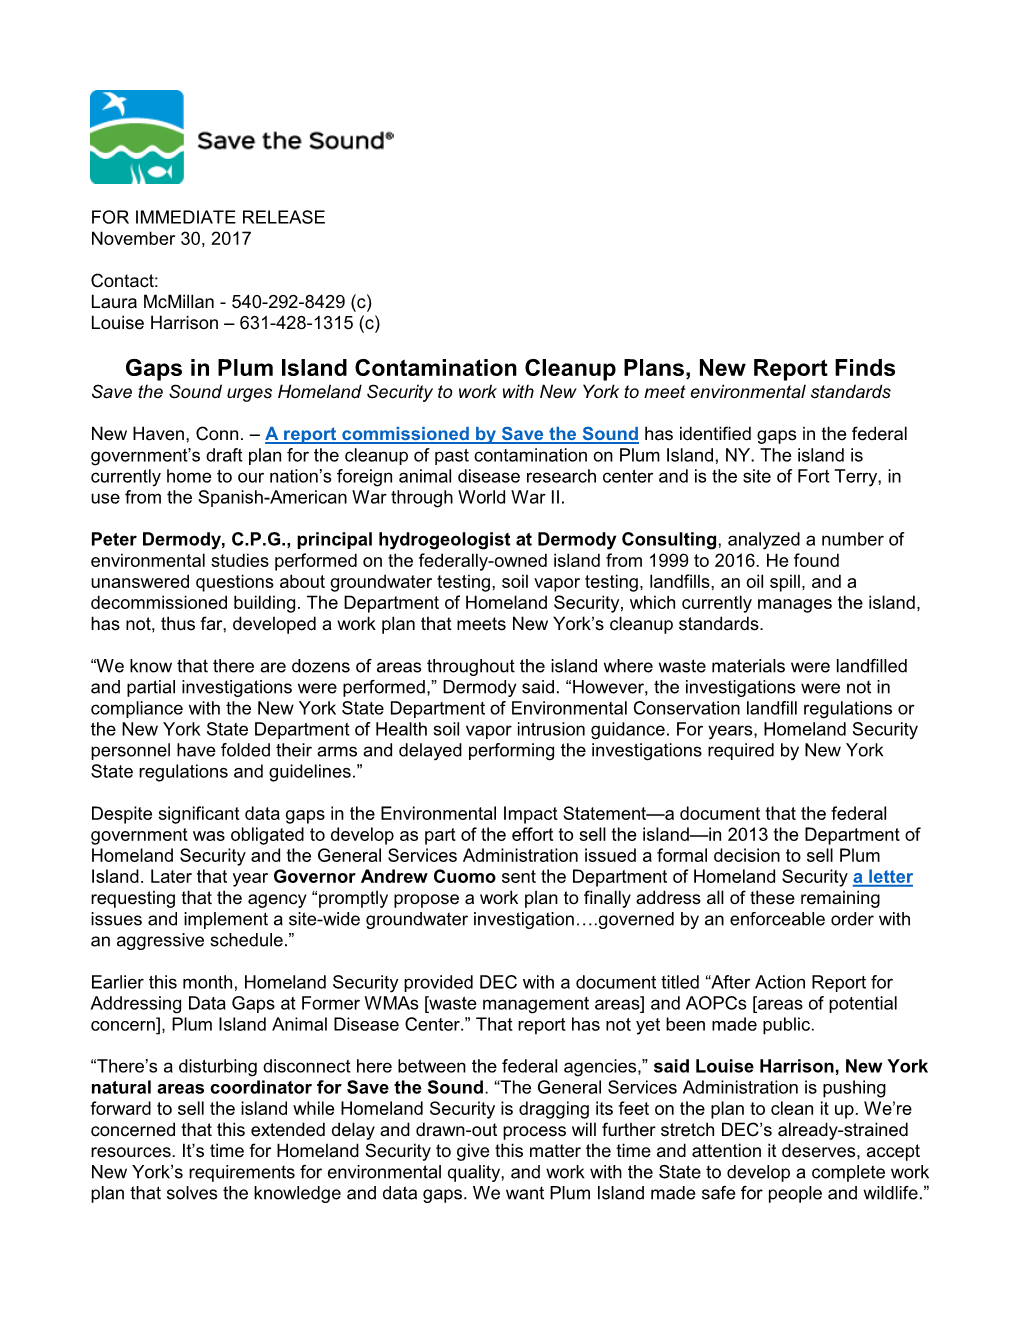 Gaps in Plum Island Contamination Cleanup Plans, New Report Finds Save the Sound Urges Homeland Security to Work with New York to Meet Environmental Standards